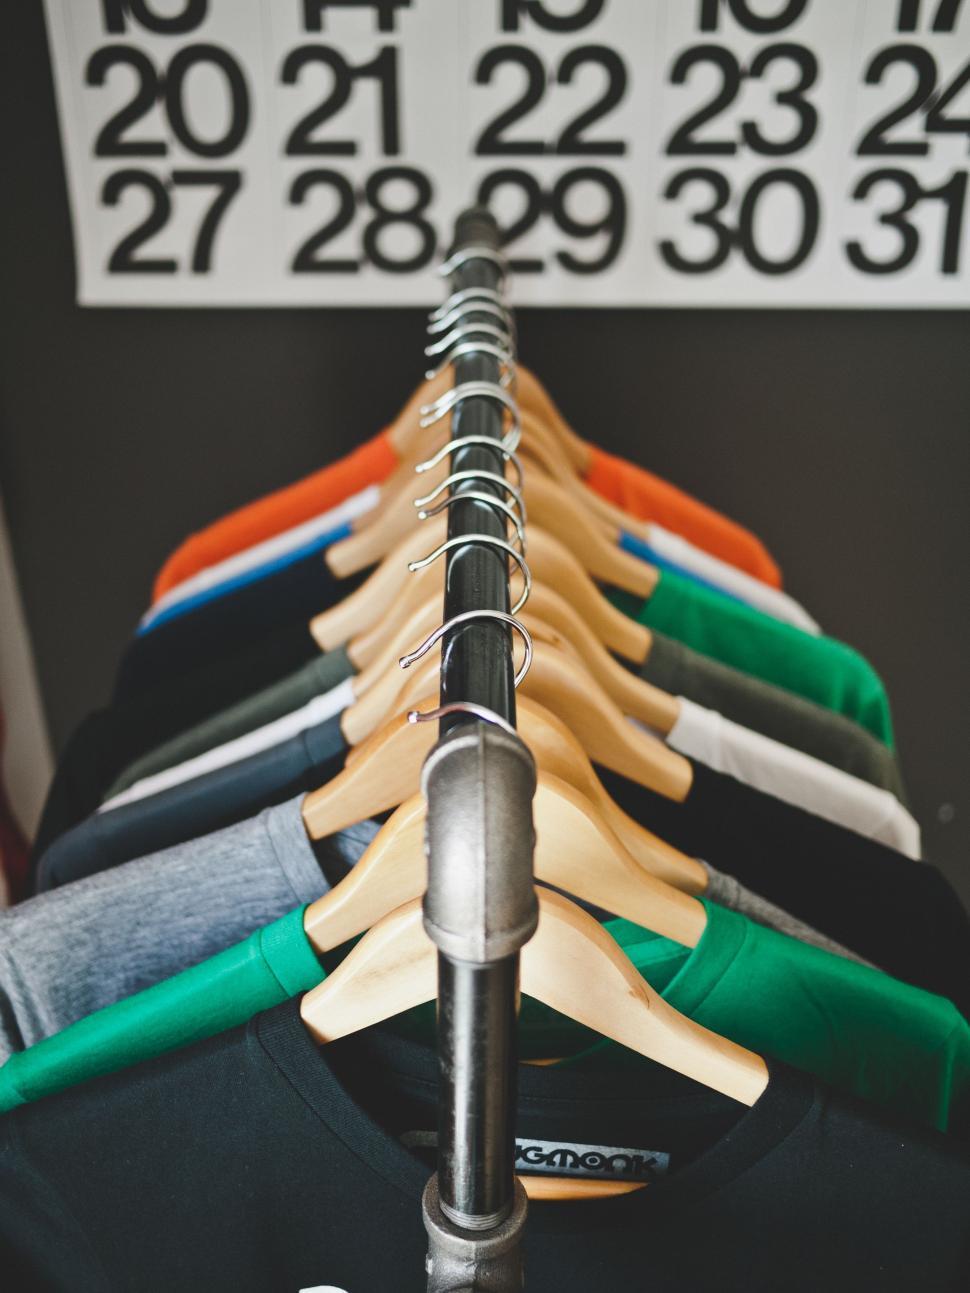 Free Image of Rack of Clothes With Price Sign 